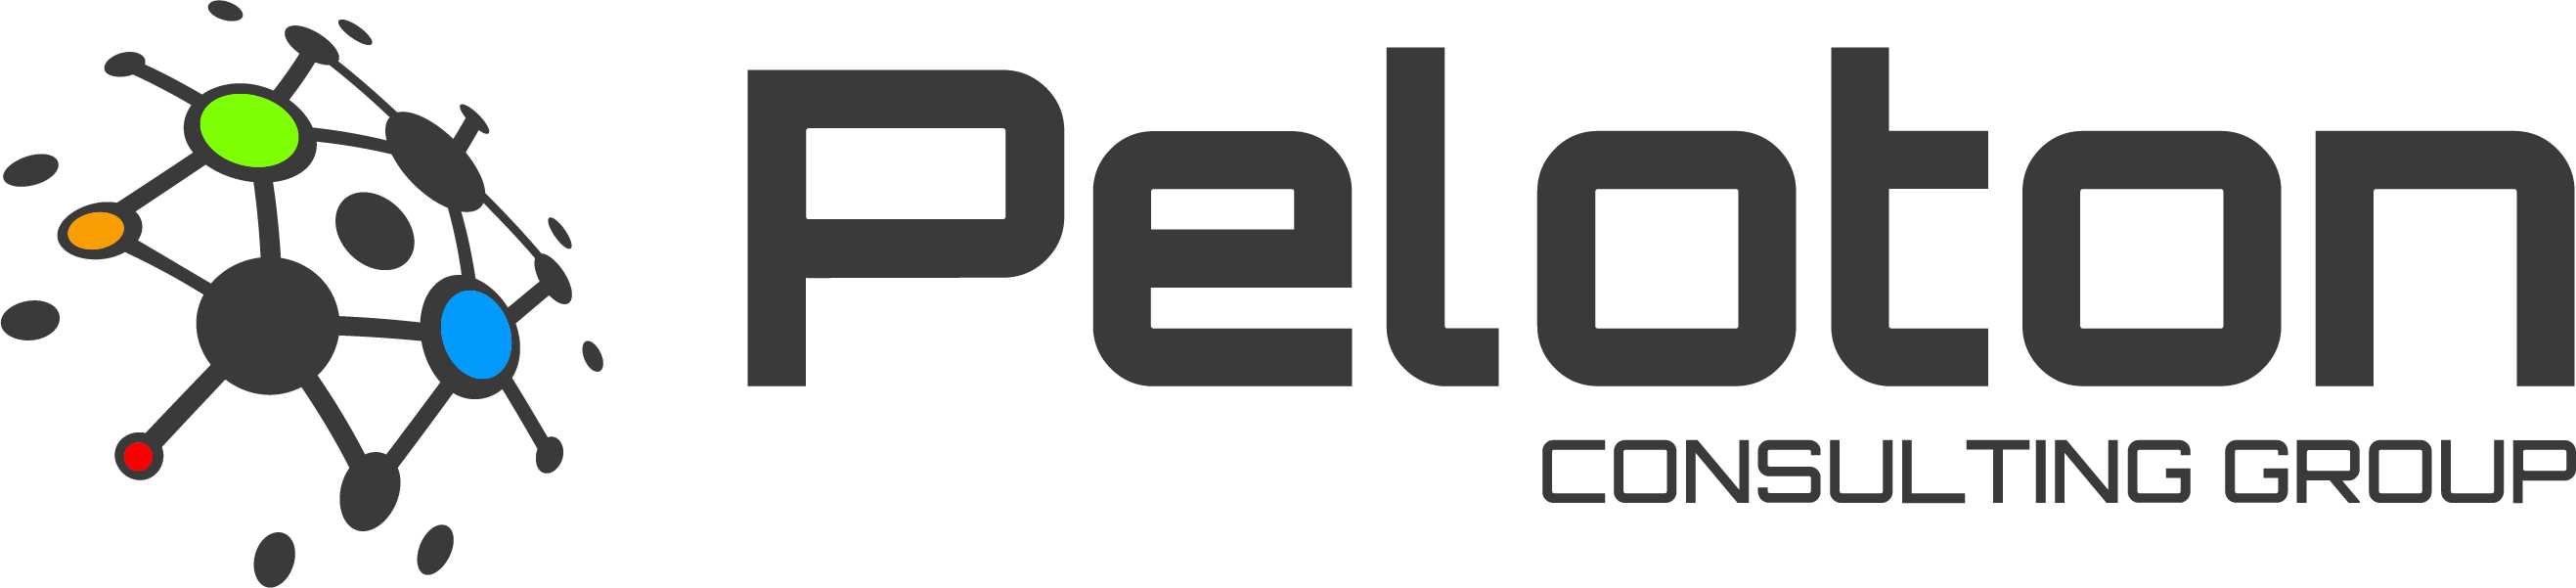 Peloton Logo - Peloton Consulting Group launches new brand and logo